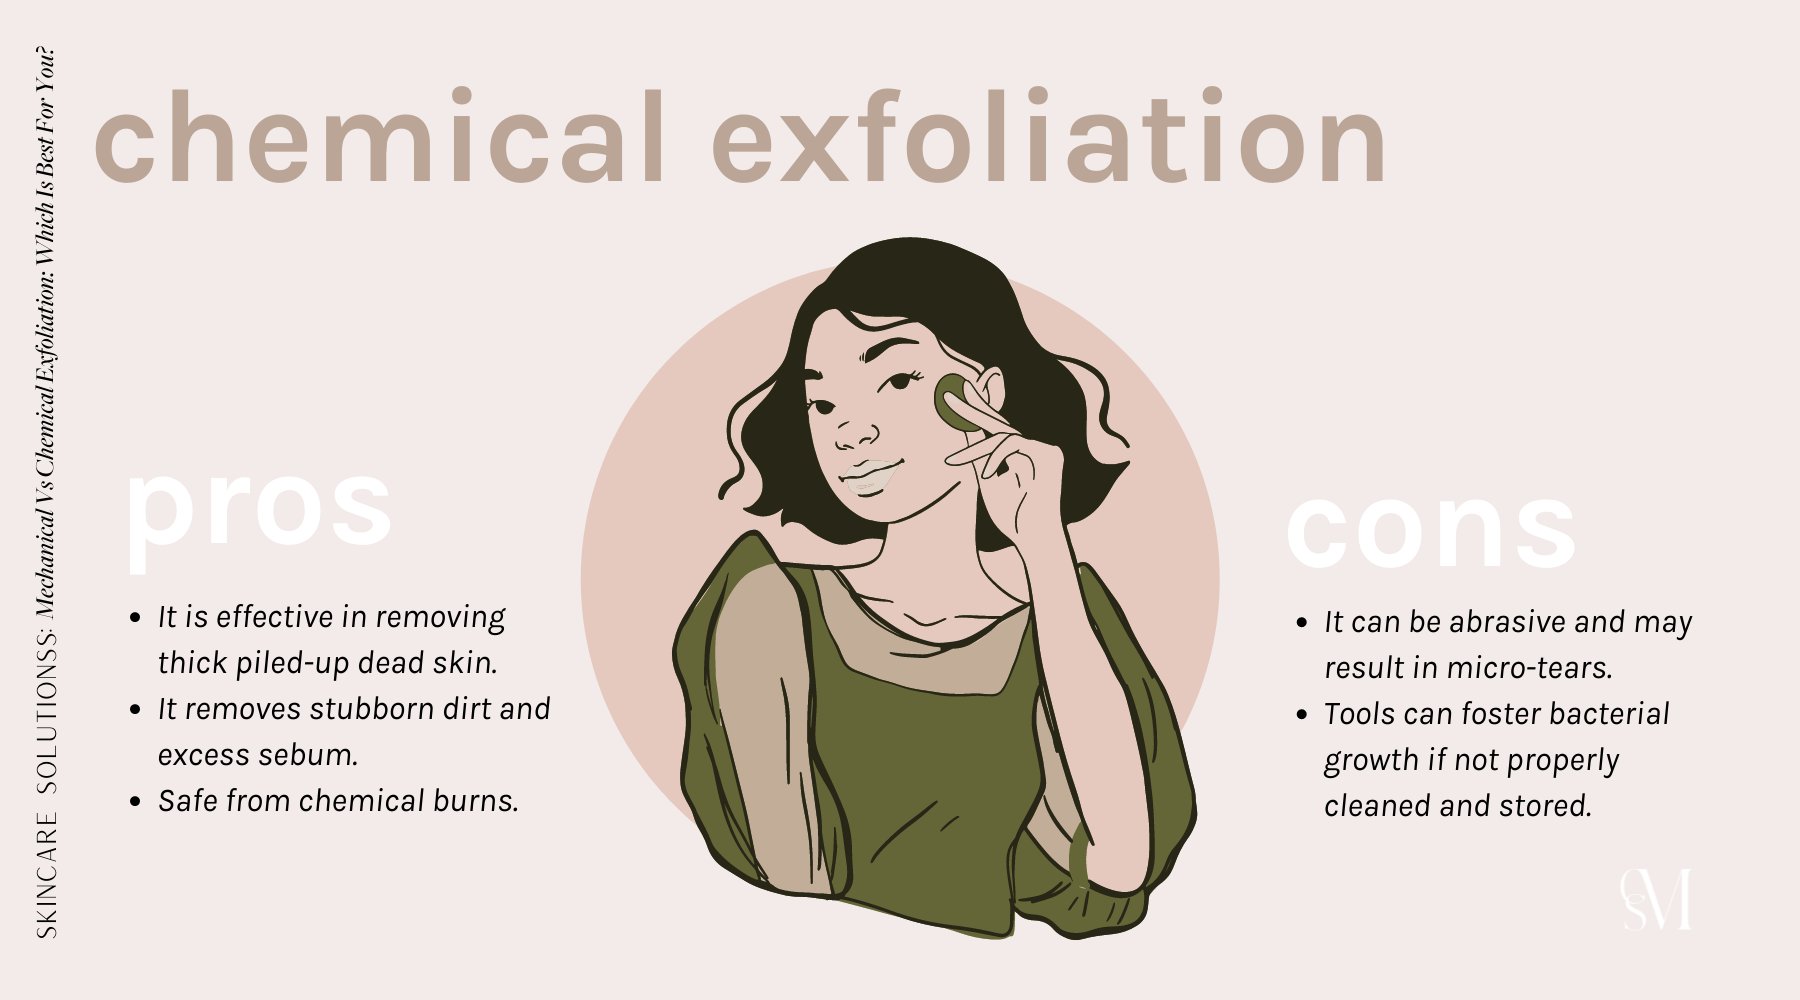 Pros and cons of chemical exfoliation. 